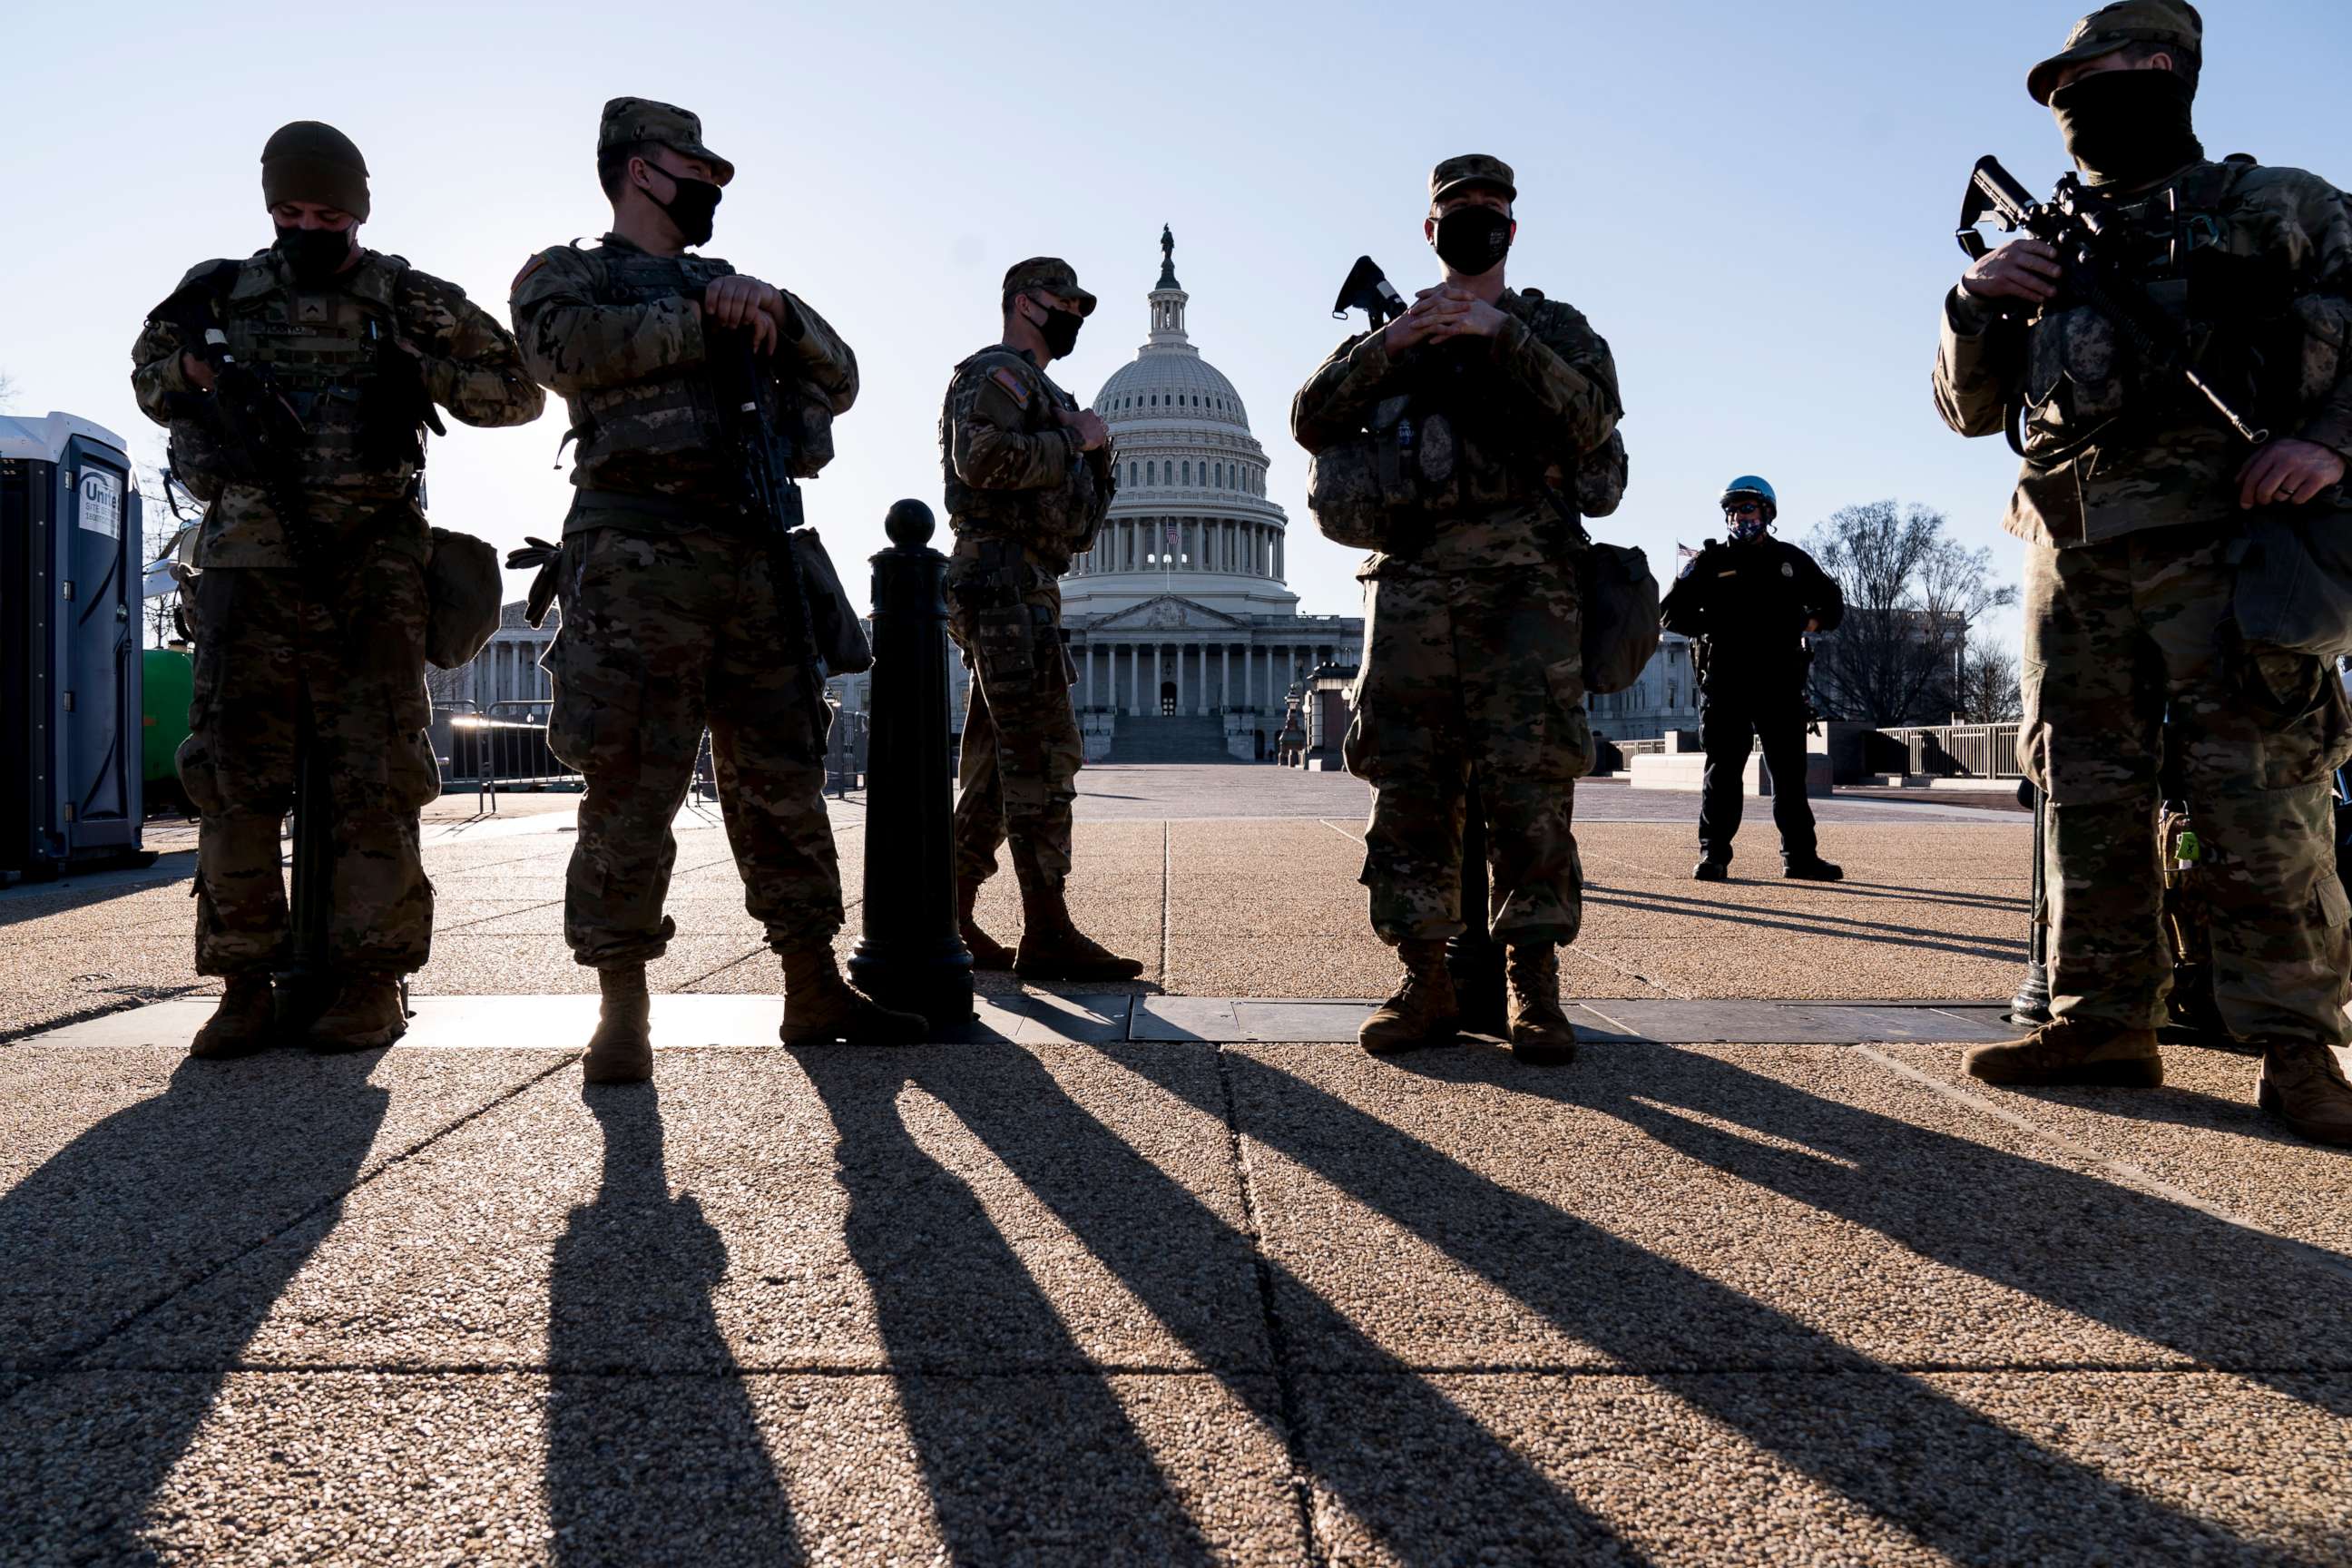 PHOTO: Members of the Michigan National Guard and the U.S. Capitol Police keep watch as heightened security remains in effect around the Capitol grounds in Washington, D.C., Wednesday, March 3, 2021. 